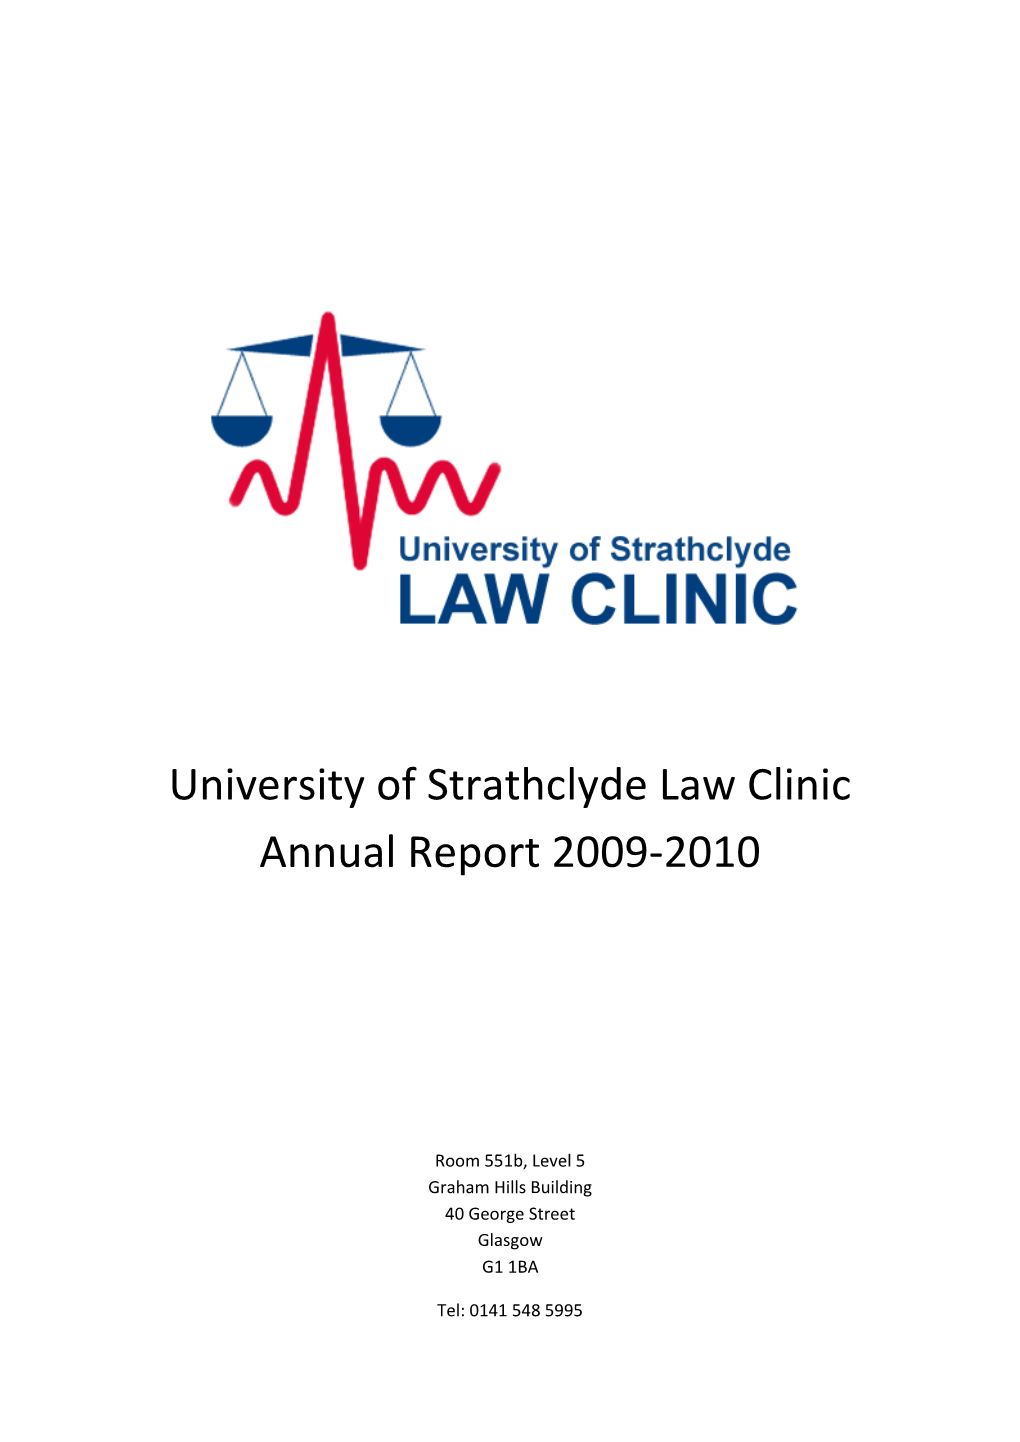 University of Strathclyde Law Clinic Annual Report 2009-2010